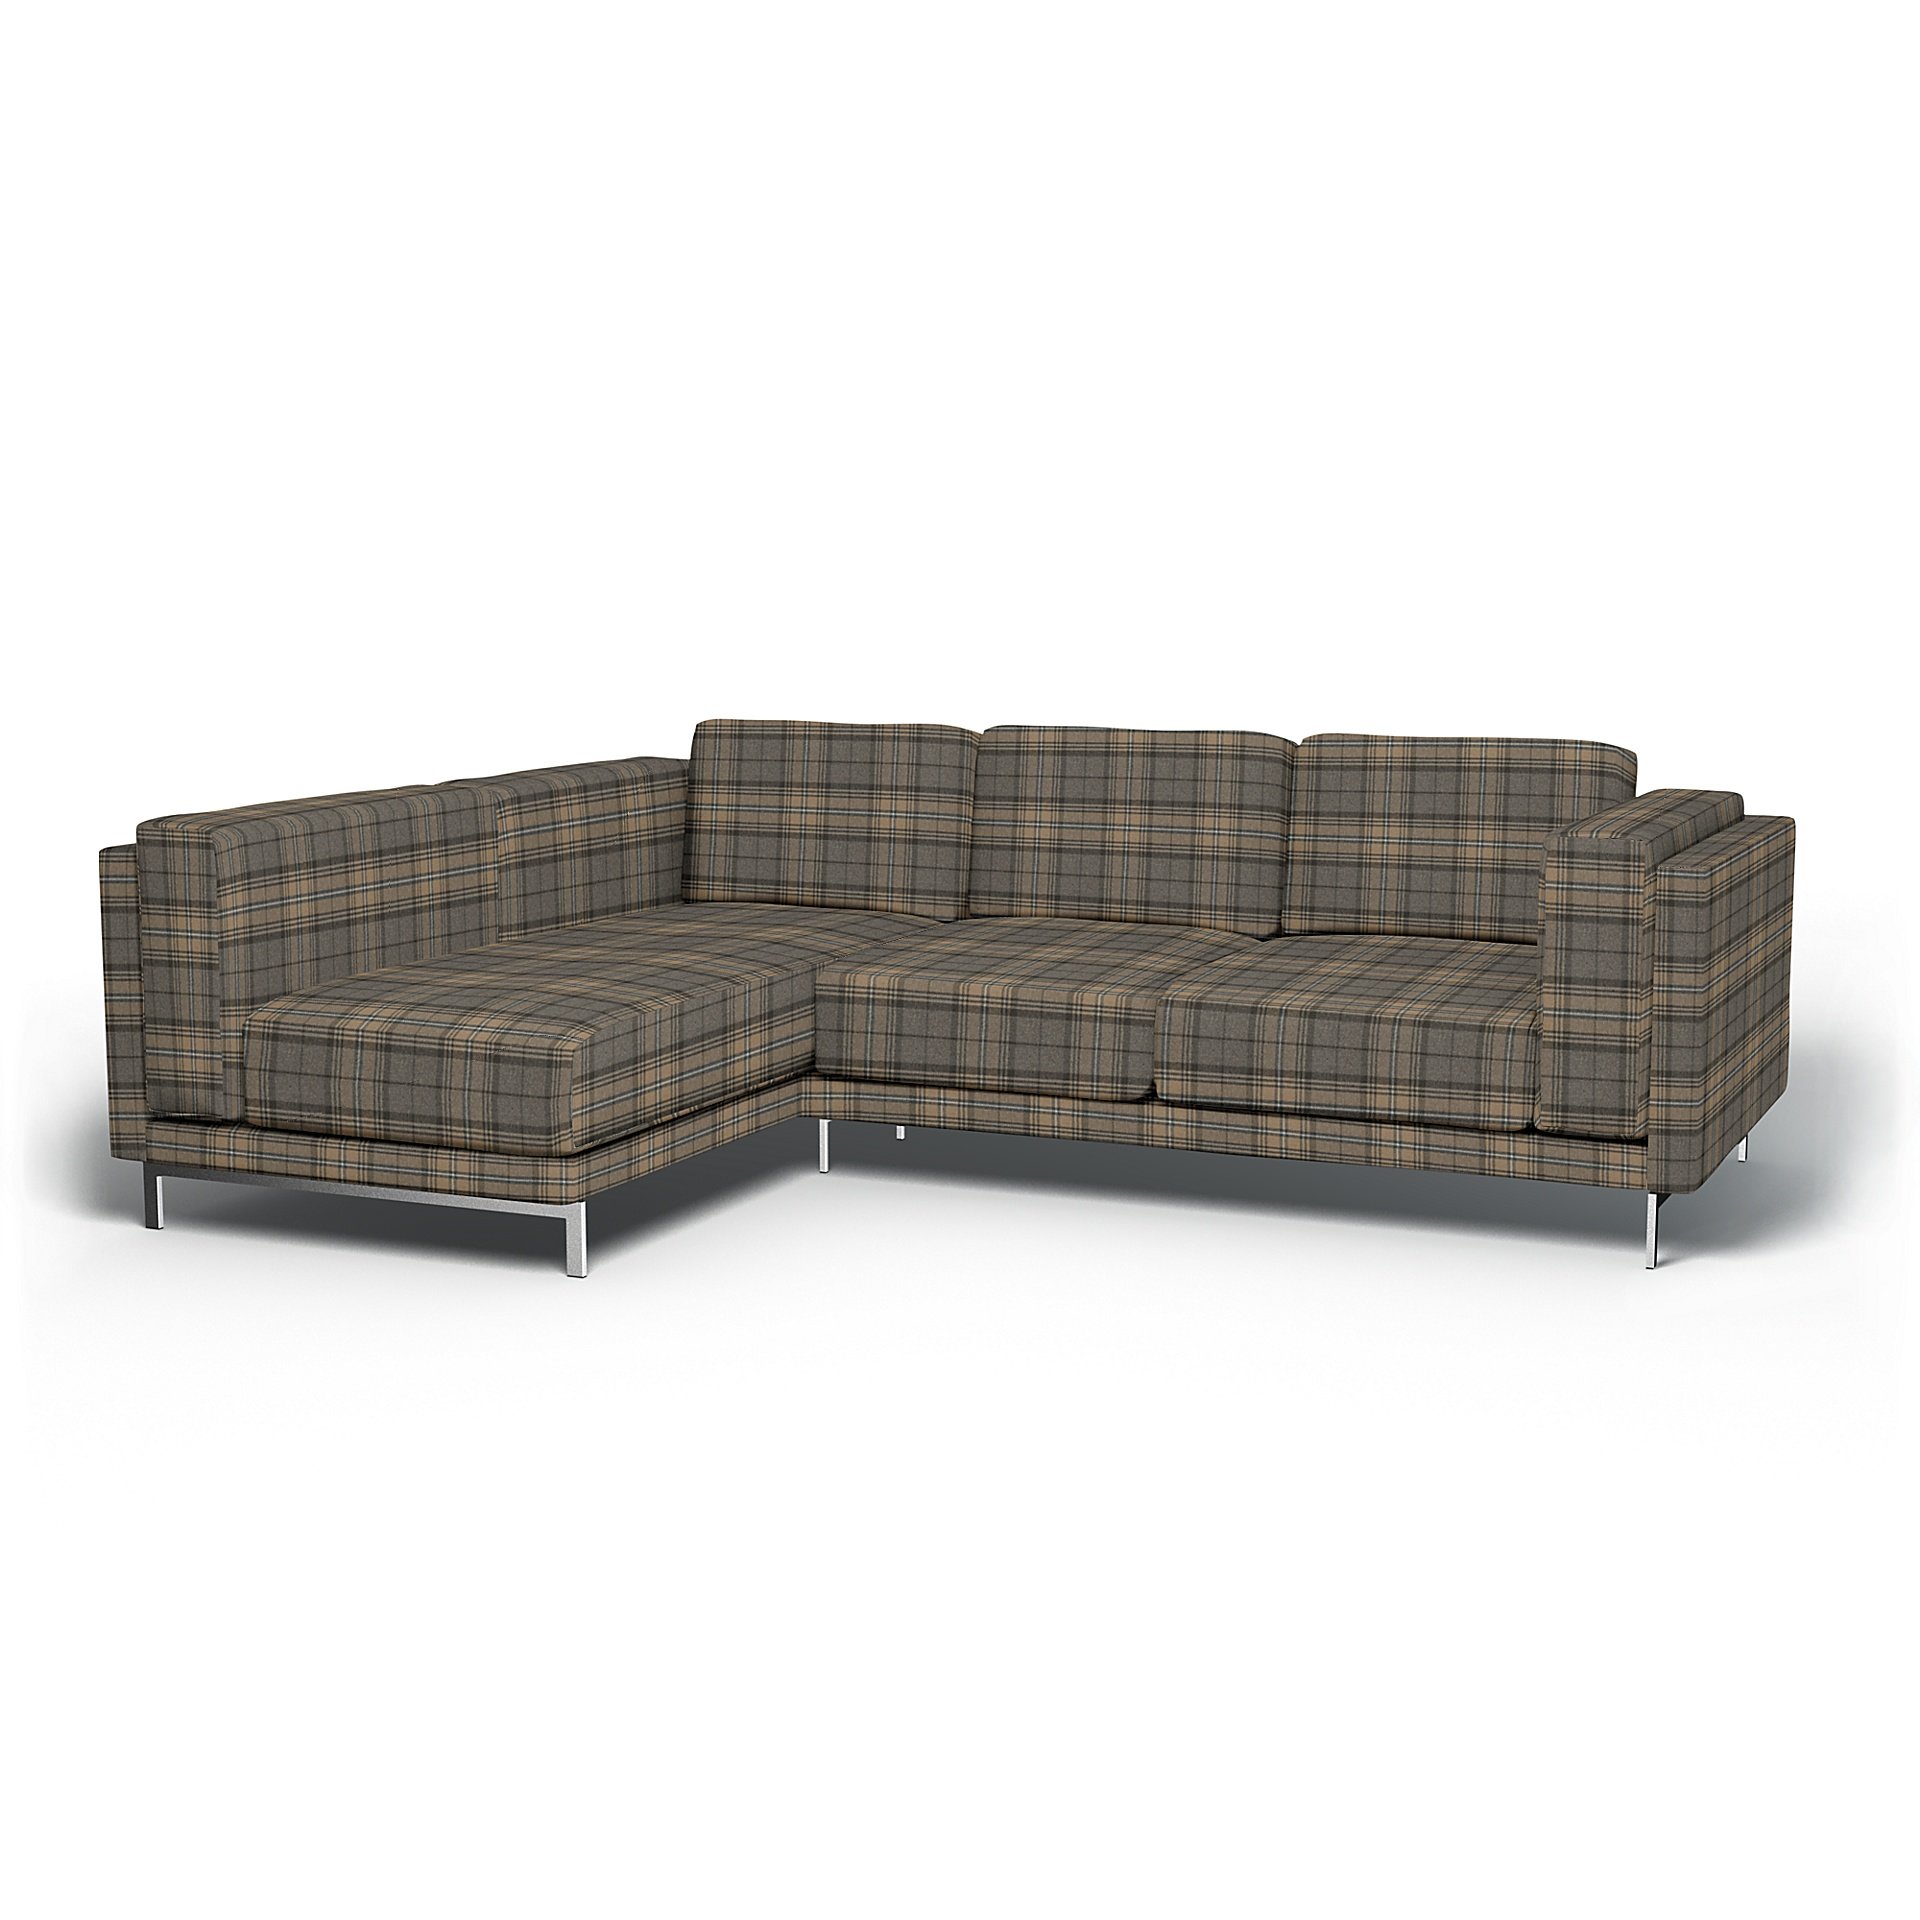 IKEA - Nockeby 3 Seater Sofa with Left Chaise Cover, Bark Brown, Wool - Bemz